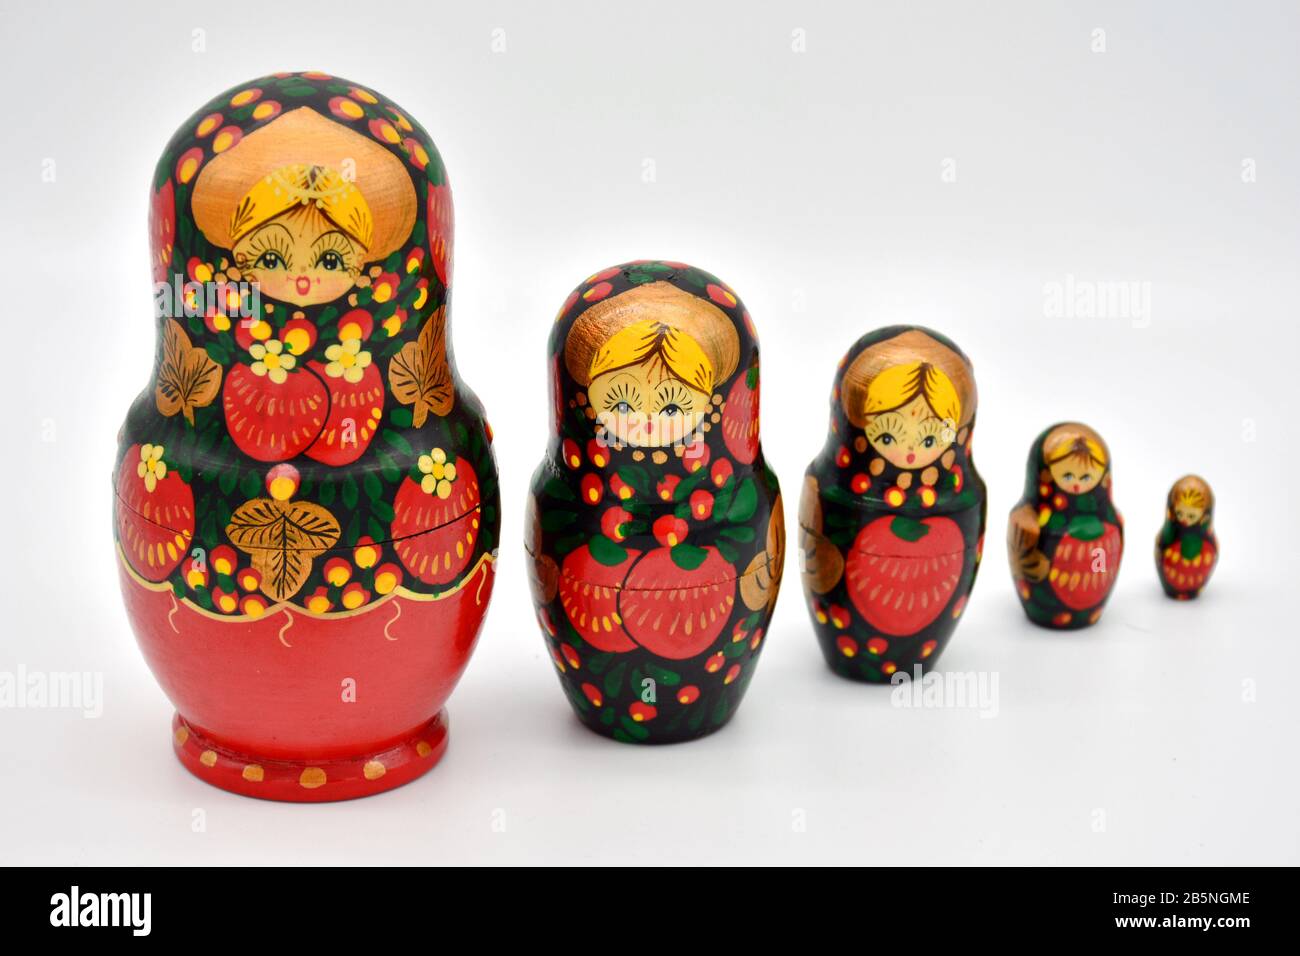 Family of matrioskas dolls, made of wood and hand painted, arranged from highest to lowest Stock Photo